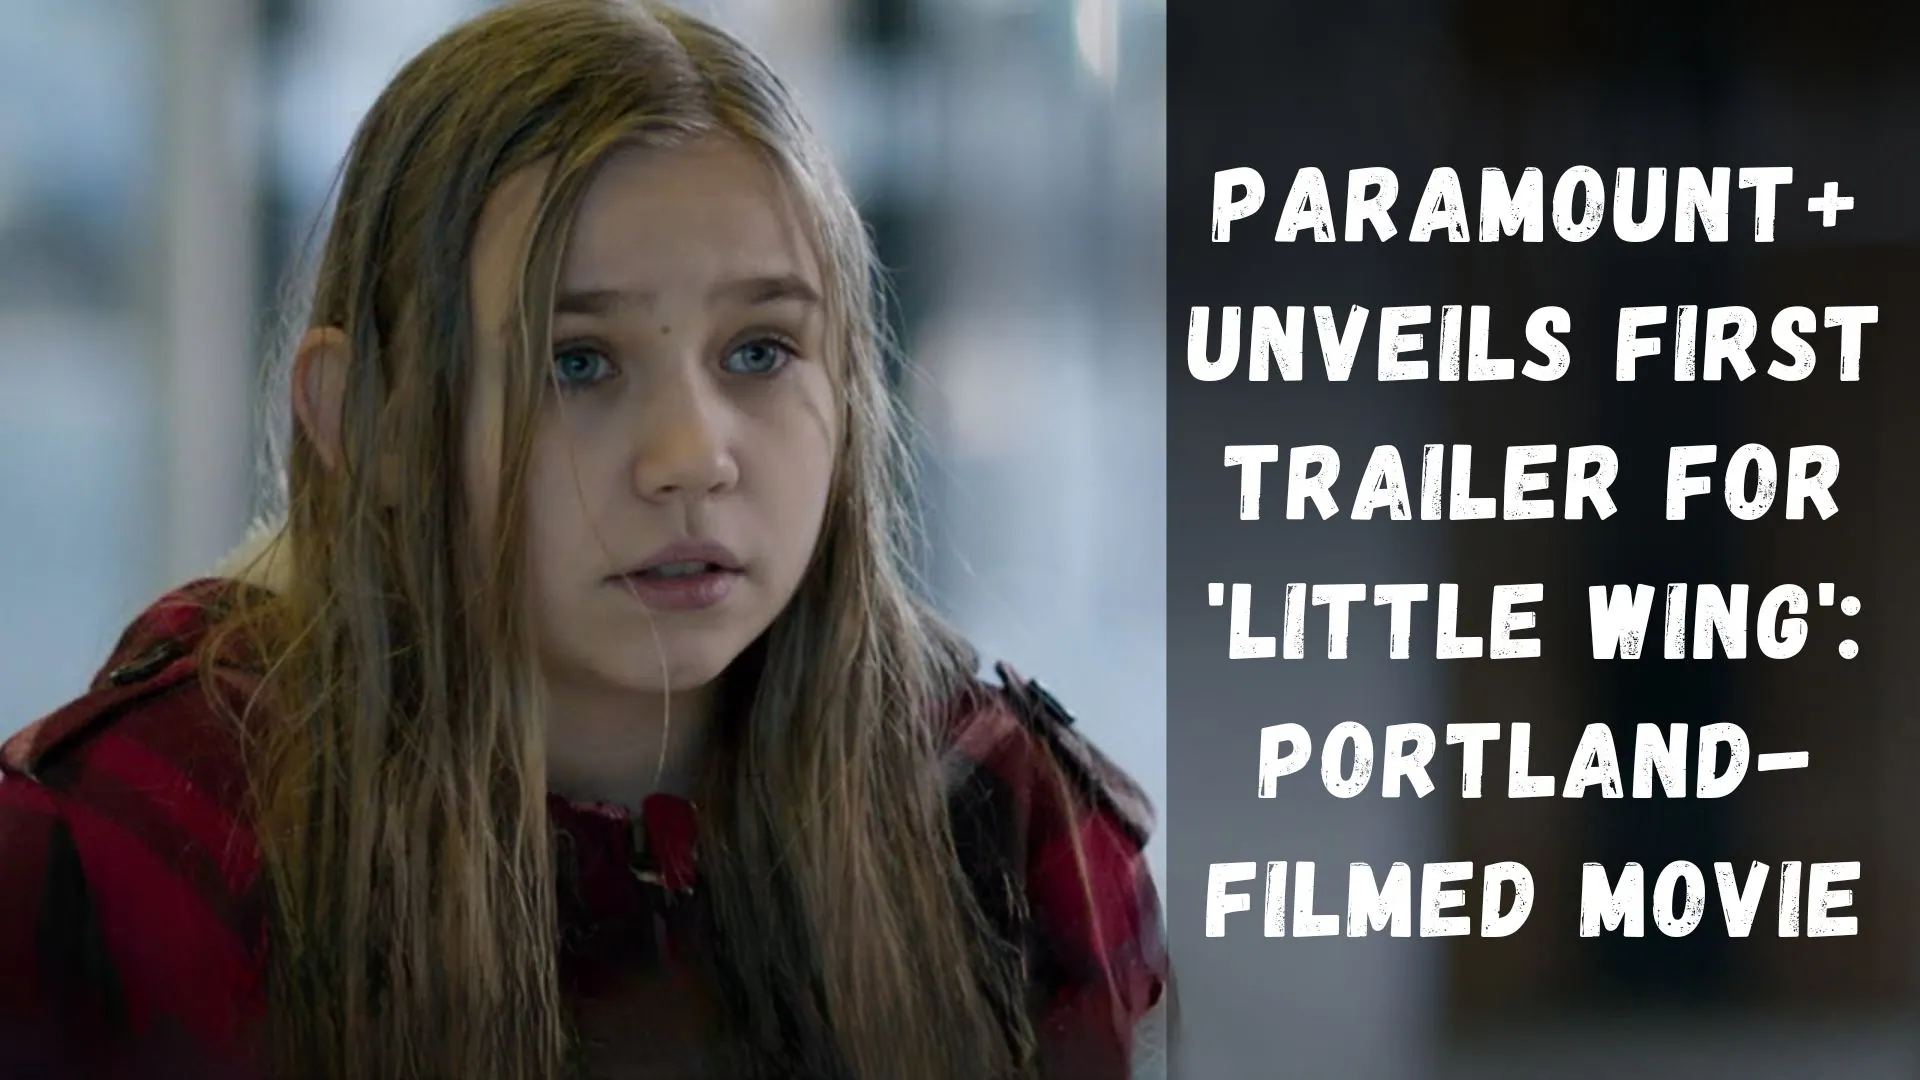 Paramount+ Unveils First Trailer for 'Little Wing' Portland-Filmed Movie